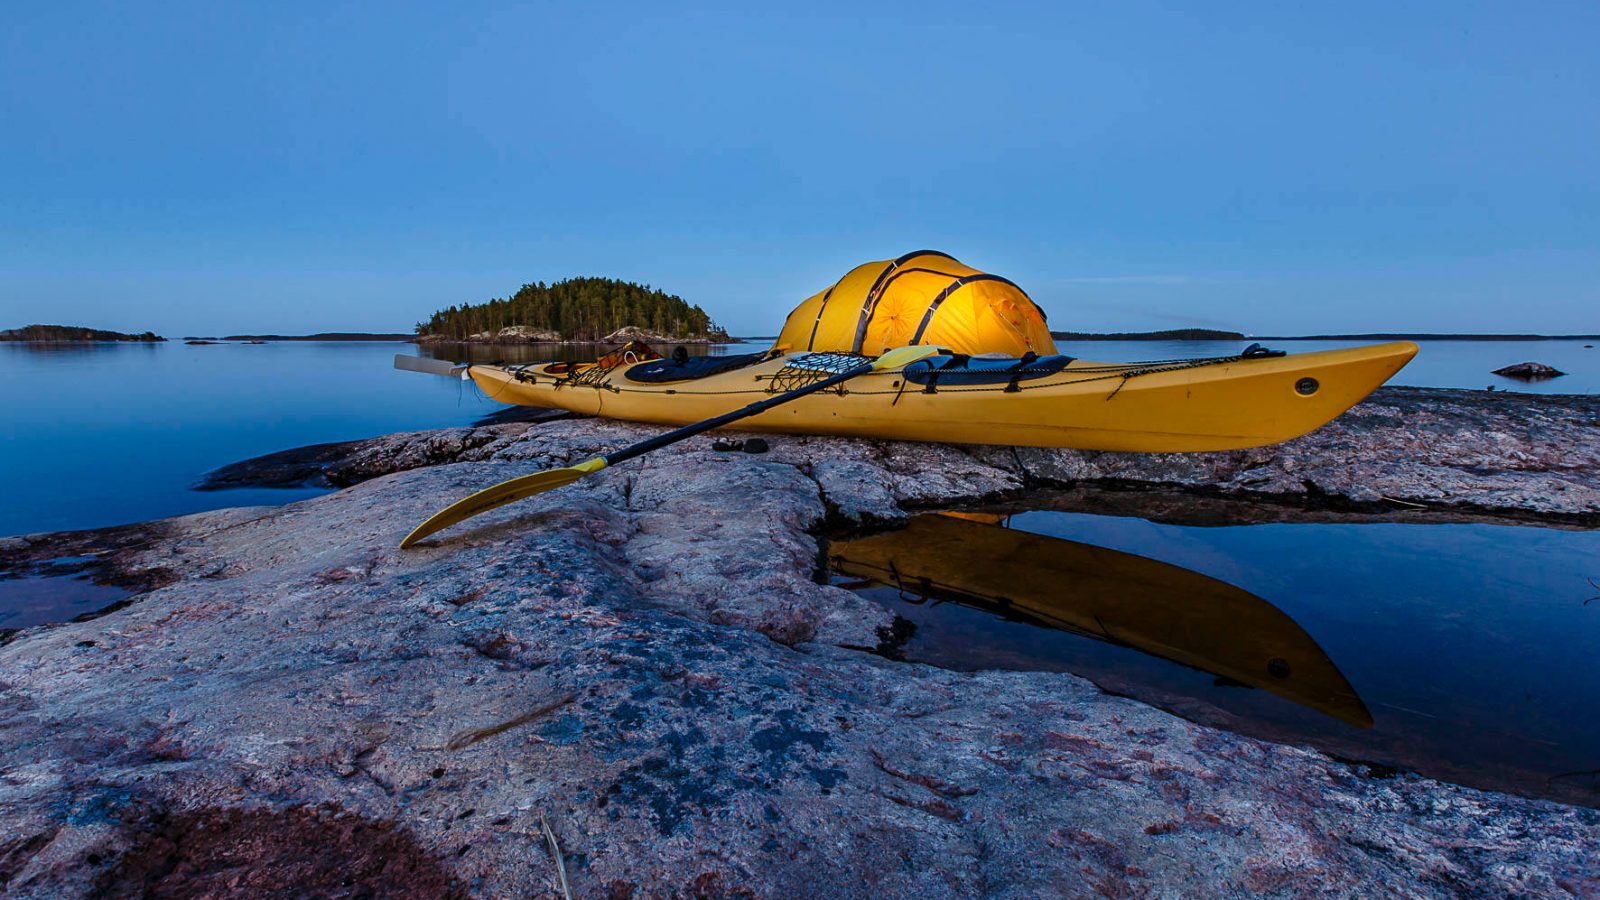 A yellow kayak and yellow tent on a cliff by the lake during nightfall